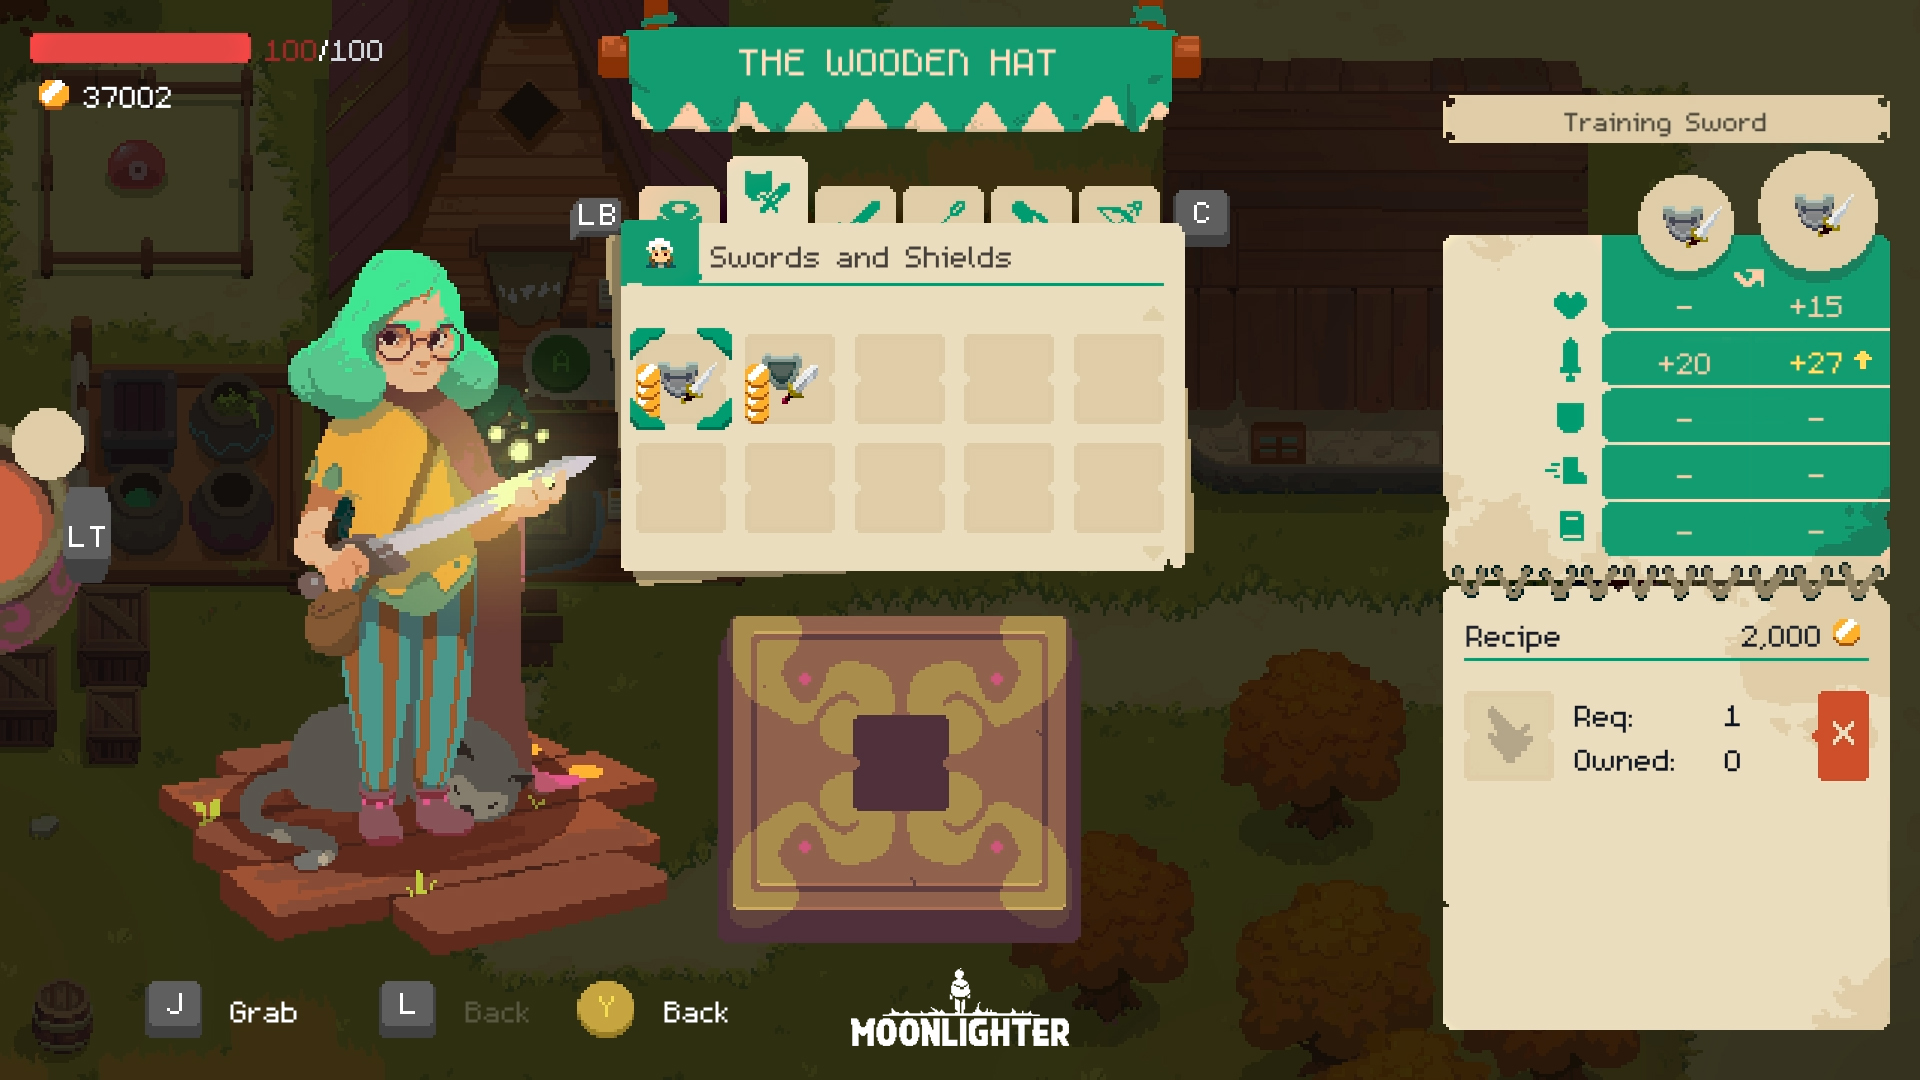 Moonlighter download the last version for windows